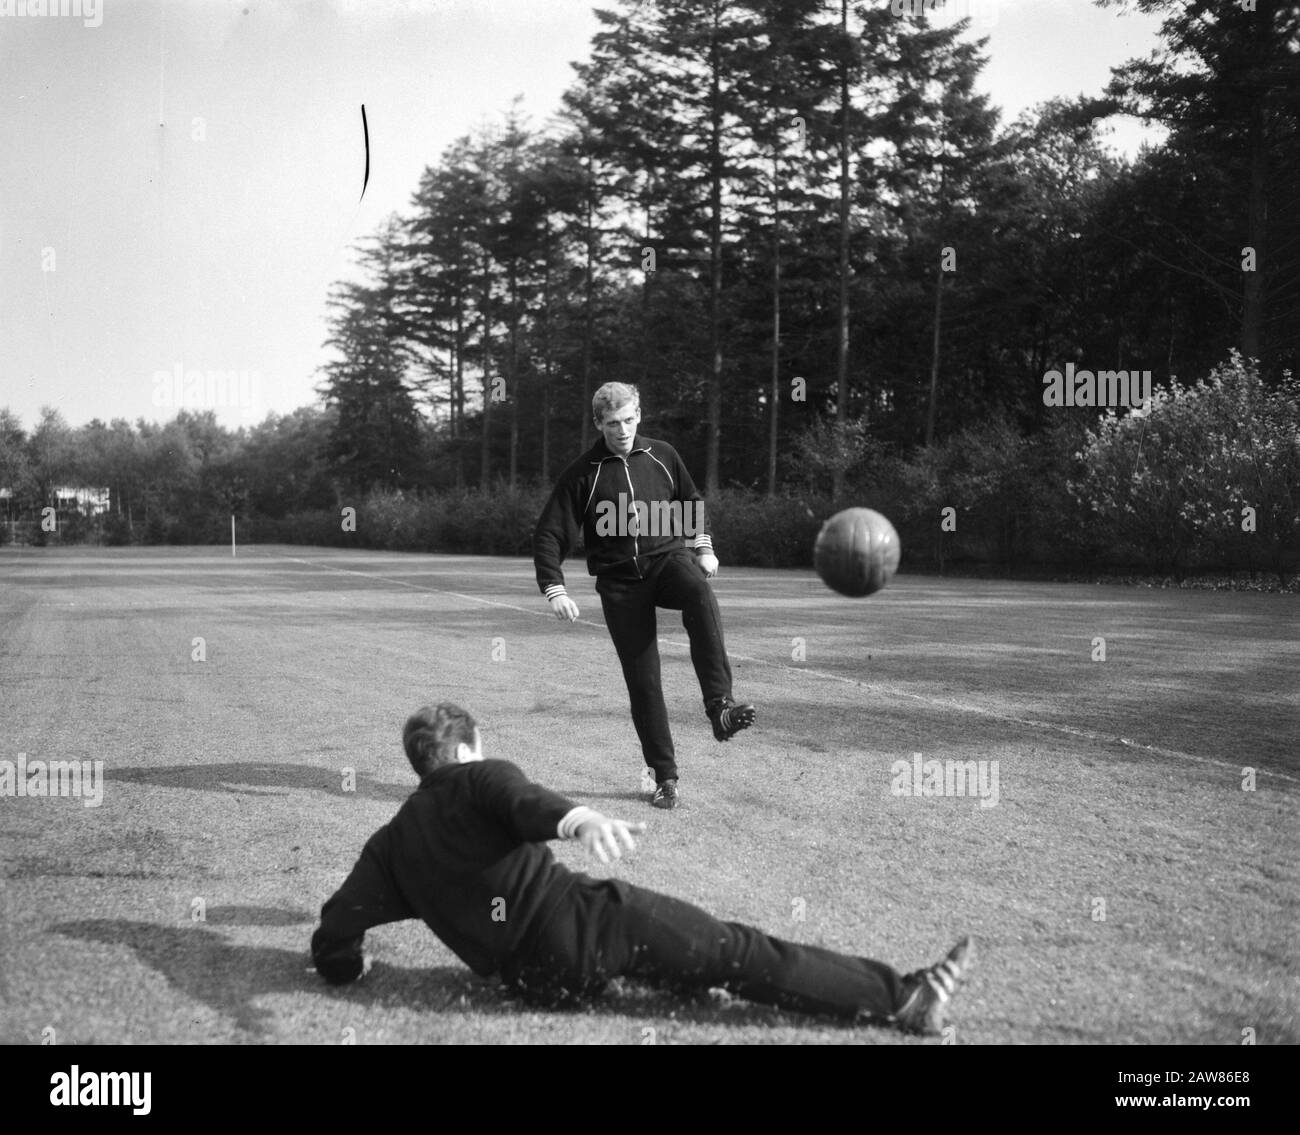 Training of the Dutch team at the sports center of the KNVB in Zeist  Piet Keizer and Bennie Muller during training Date: October 13, 1965 Location: Utrecht (province) Zeist Keywords: sports, sports training, soccer, football Person Name: Keizer, Piet Muller, Bennie Stock Photo